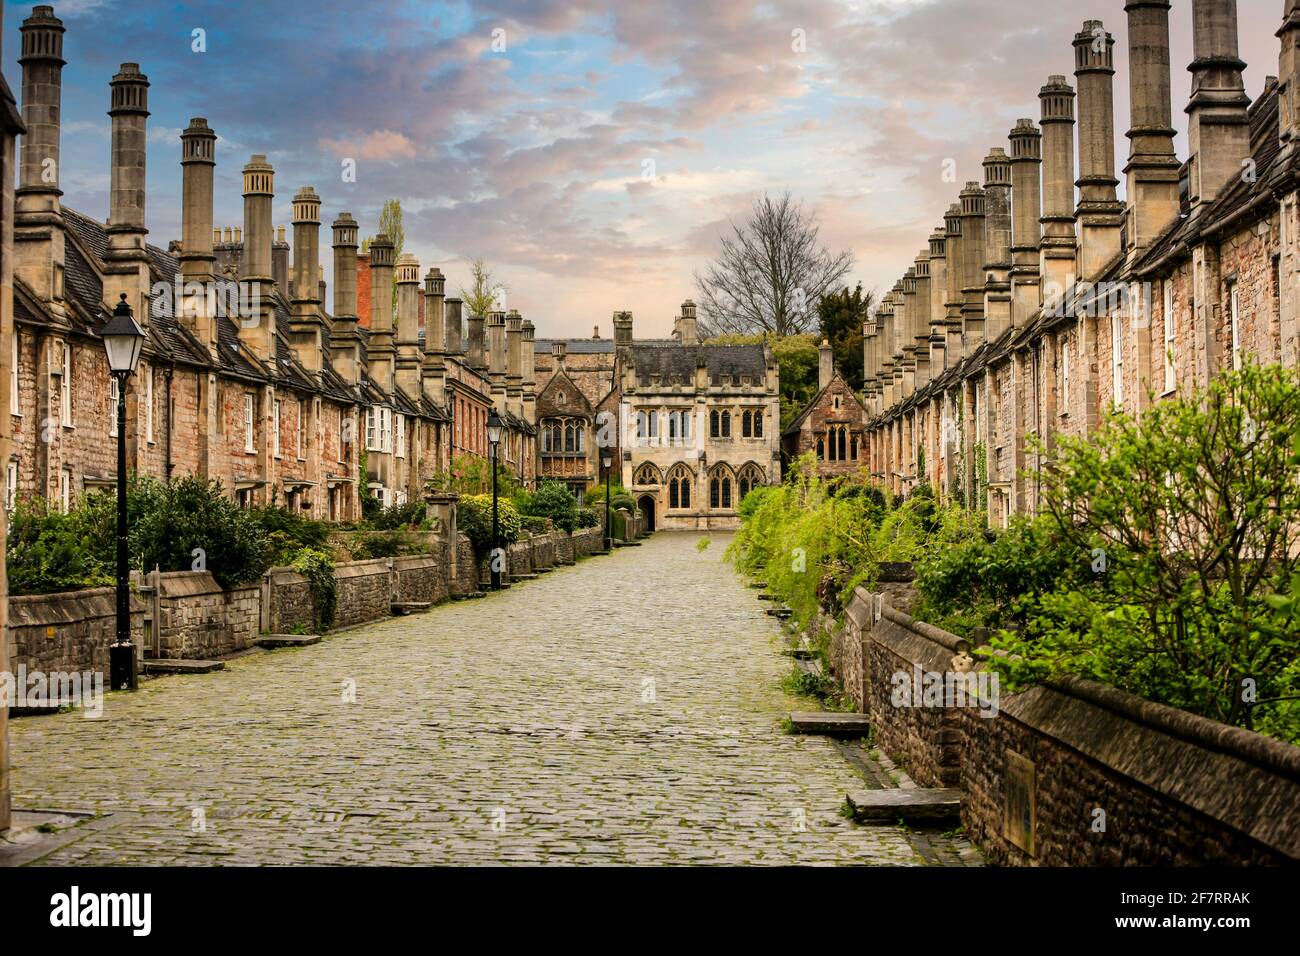 The Vicar's Close in Wells Somerset, UK Stock Photo